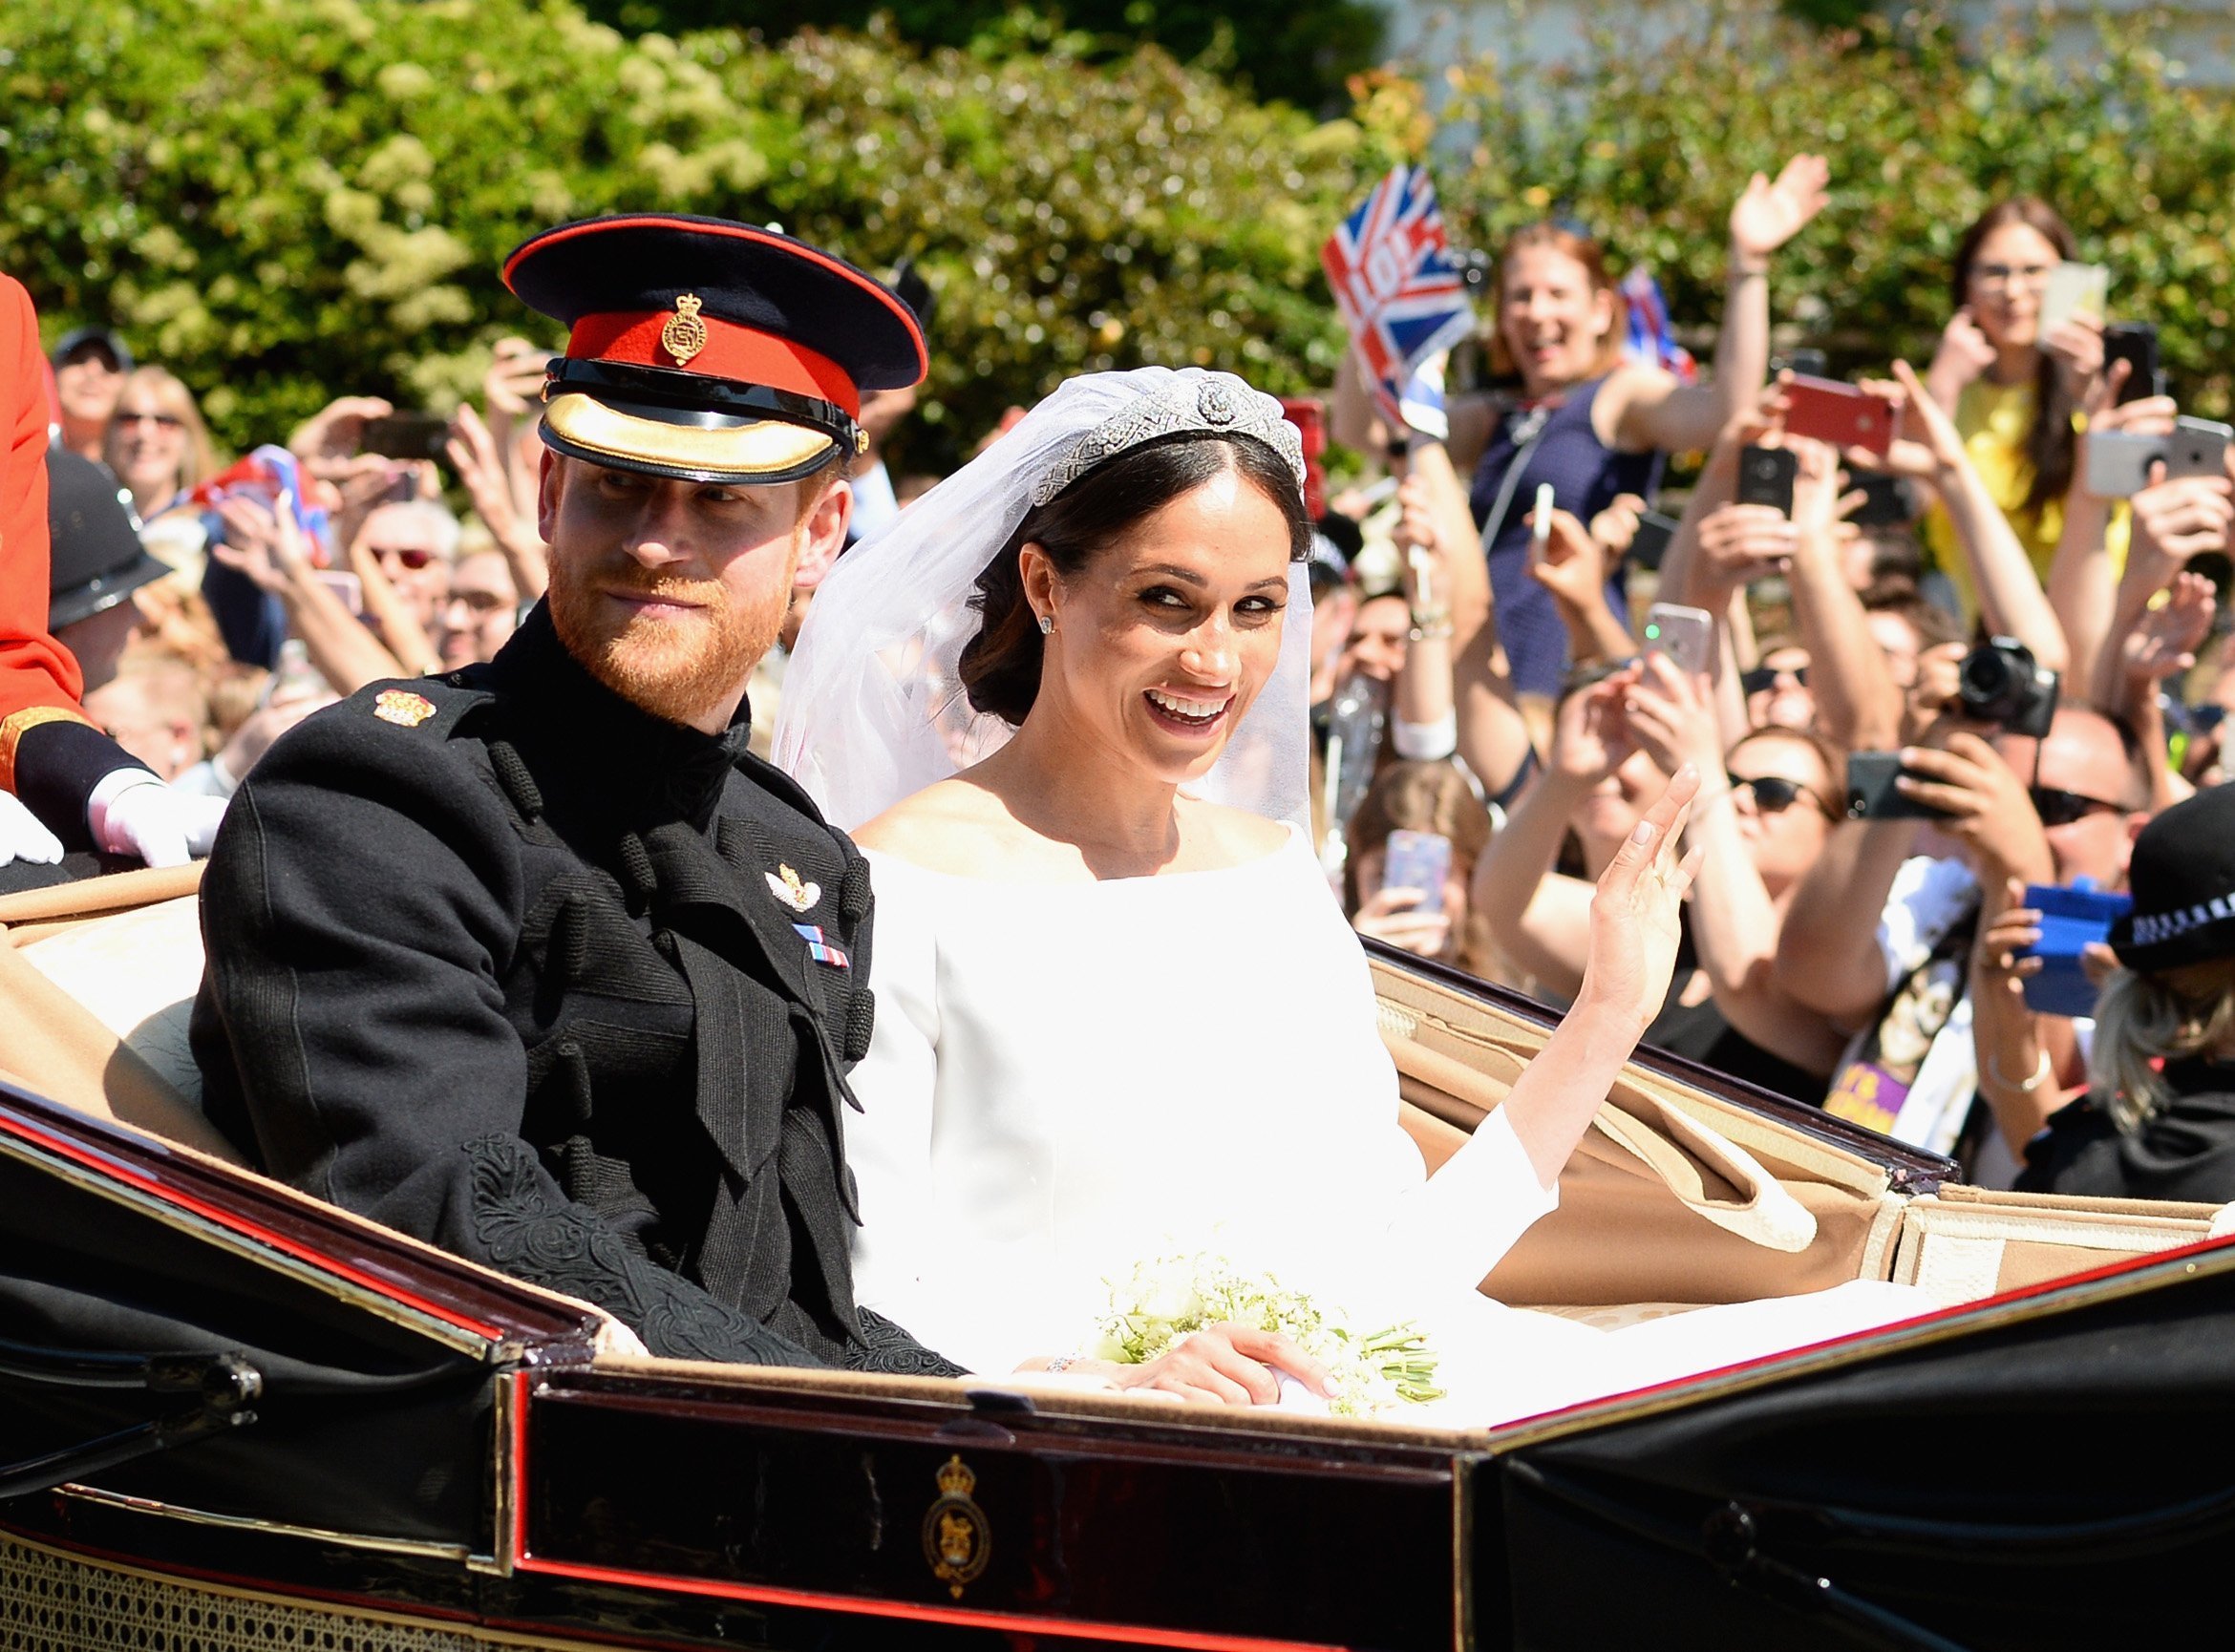 Prince Harry & Meghan Markle leave Windsor Castle after getting married at St Georges Chapel on May 19, 2018 in Windsor, England | Photo: Getty Images